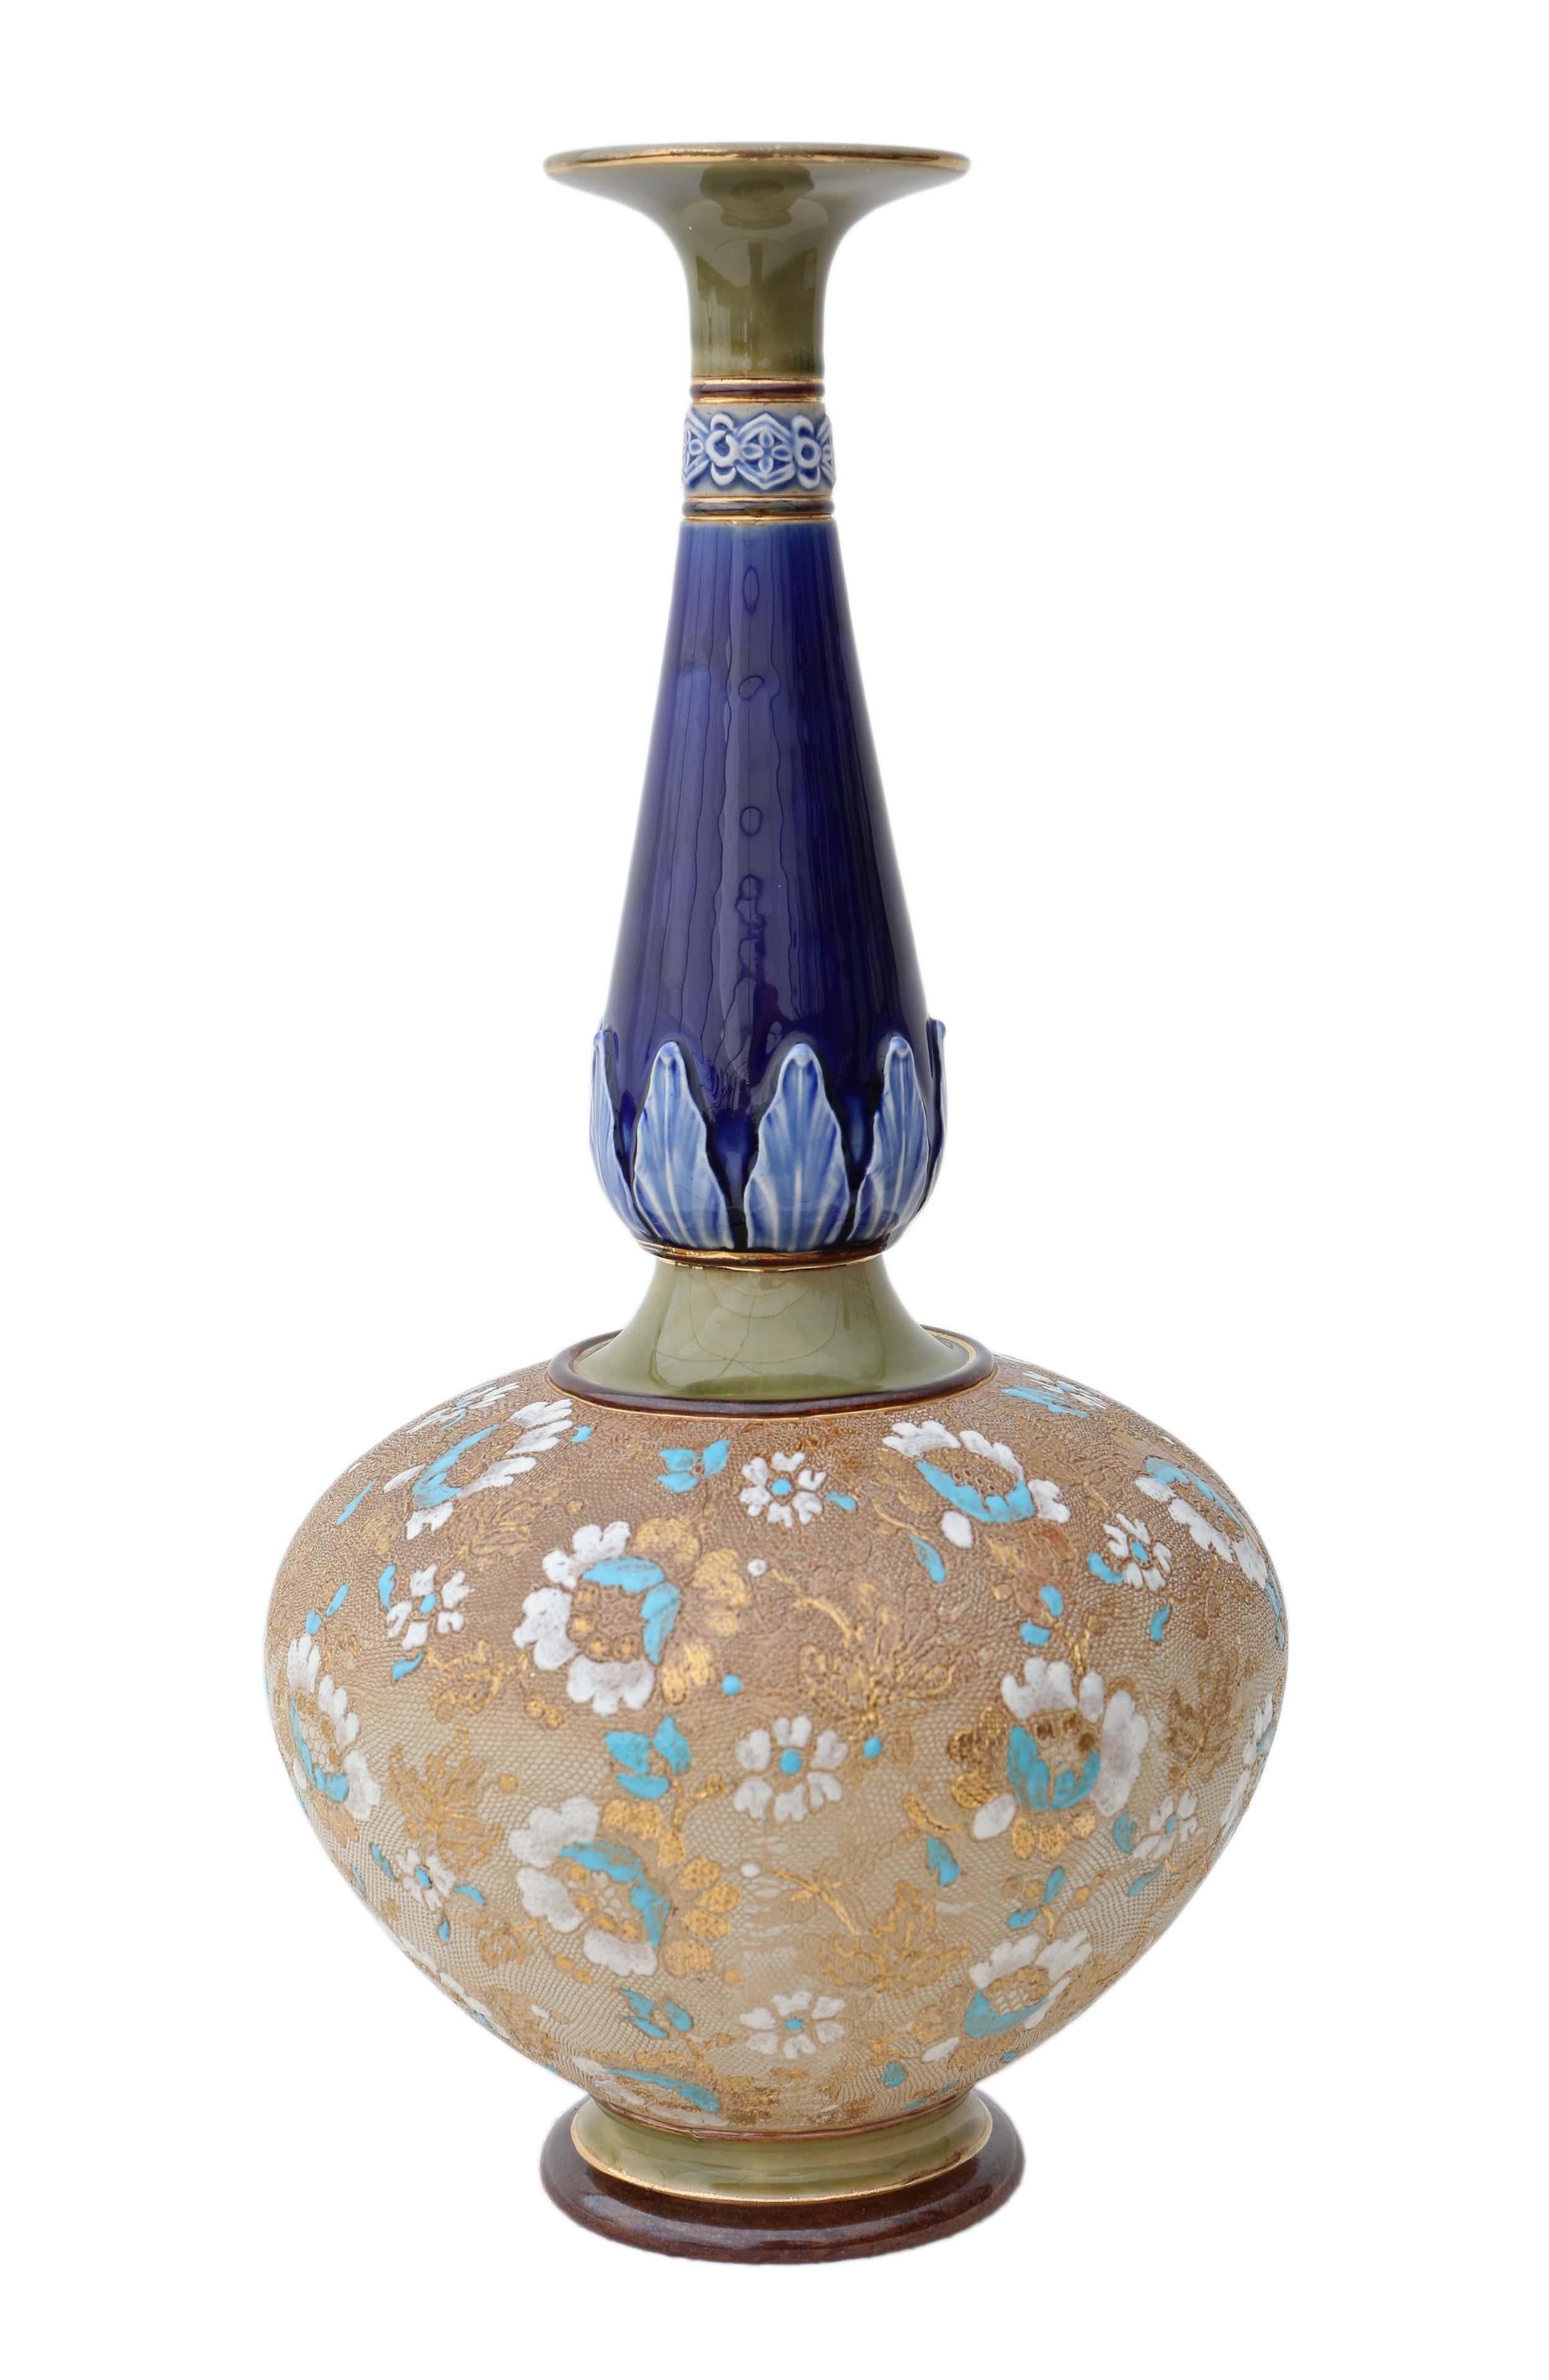 Antique large Royal Doulton Slater vase. Art Nouveau, dating from circa 1900-1920.
Lovely quality vase... a touch of class.
Would look amazing in the right location!
Overall maximum dimensions: 21cm diameter x 40cm height.
In good